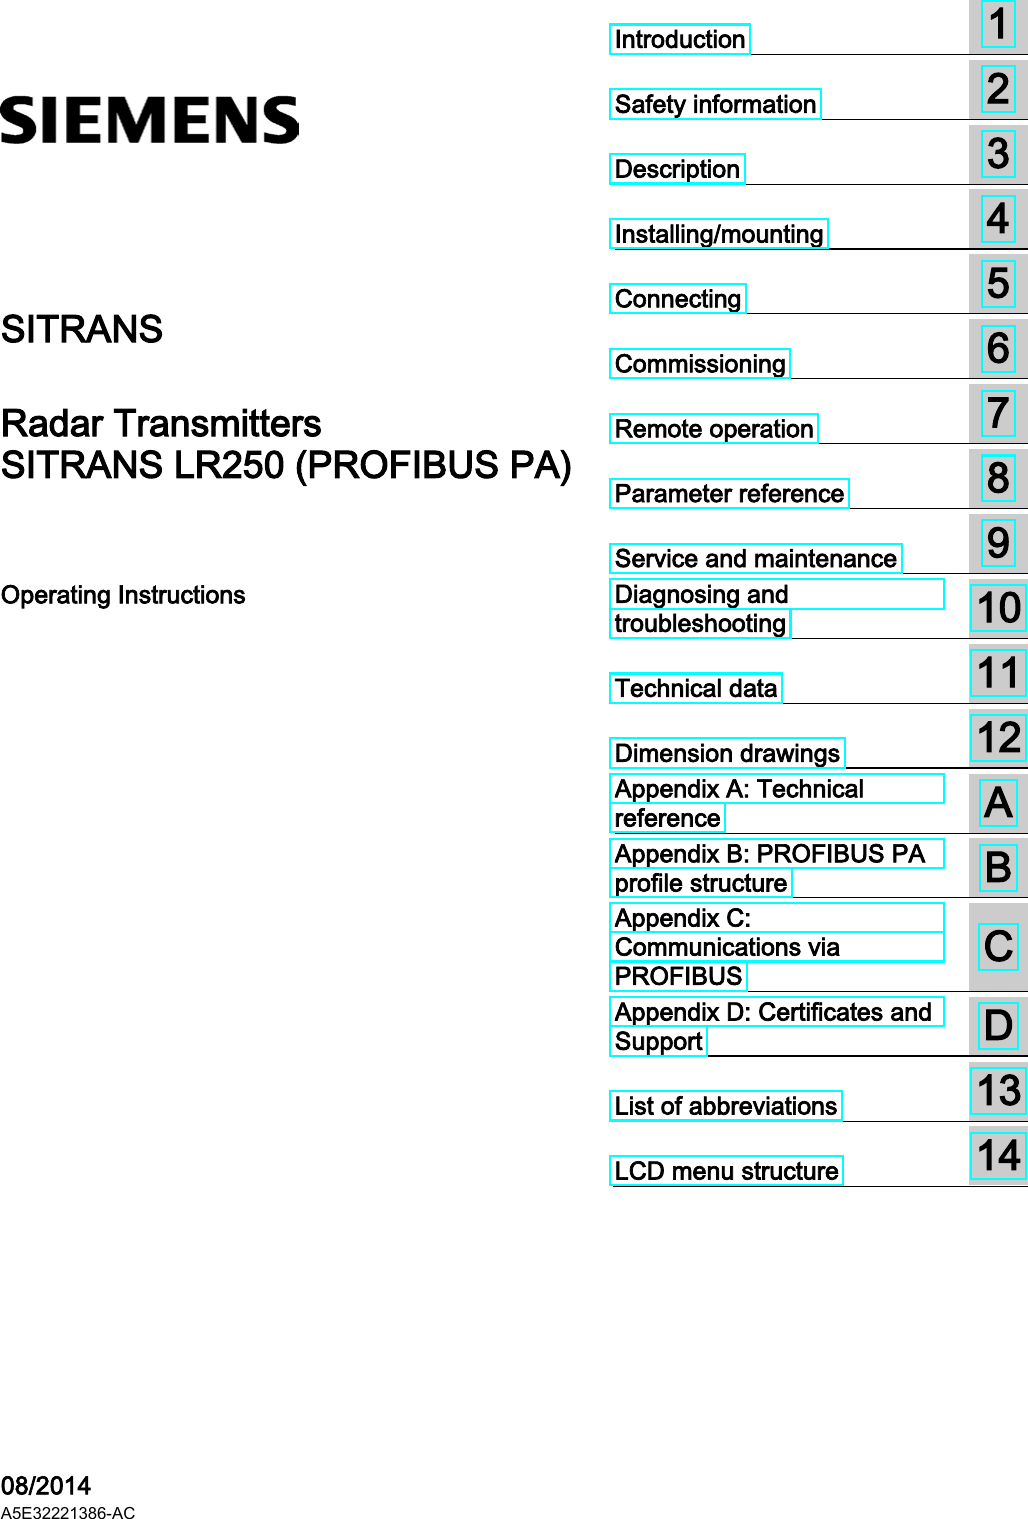   SITRANS Radar Transmitters SITRANS LR250 (PROFIBUS PA) Operating Instructions    08/2014 A5E32221386-AC Introduction  1  Safety information  2  Description  3  Installing/mounting  4  Connecting  5  Commissioning  6  Remote operation  7  Parameter reference  8  Service and maintenance  9  Diagnosing and troubleshooting  10  Technical data  11  Dimension drawings  12  Appendix A: Technical reference  A  Appendix B: PROFIBUS PA profile structure  B  Appendix C: Communications via PROFIBUS  C  Appendix D: Certificates and Support  D  List of abbreviations  13  LCD menu structure  14 